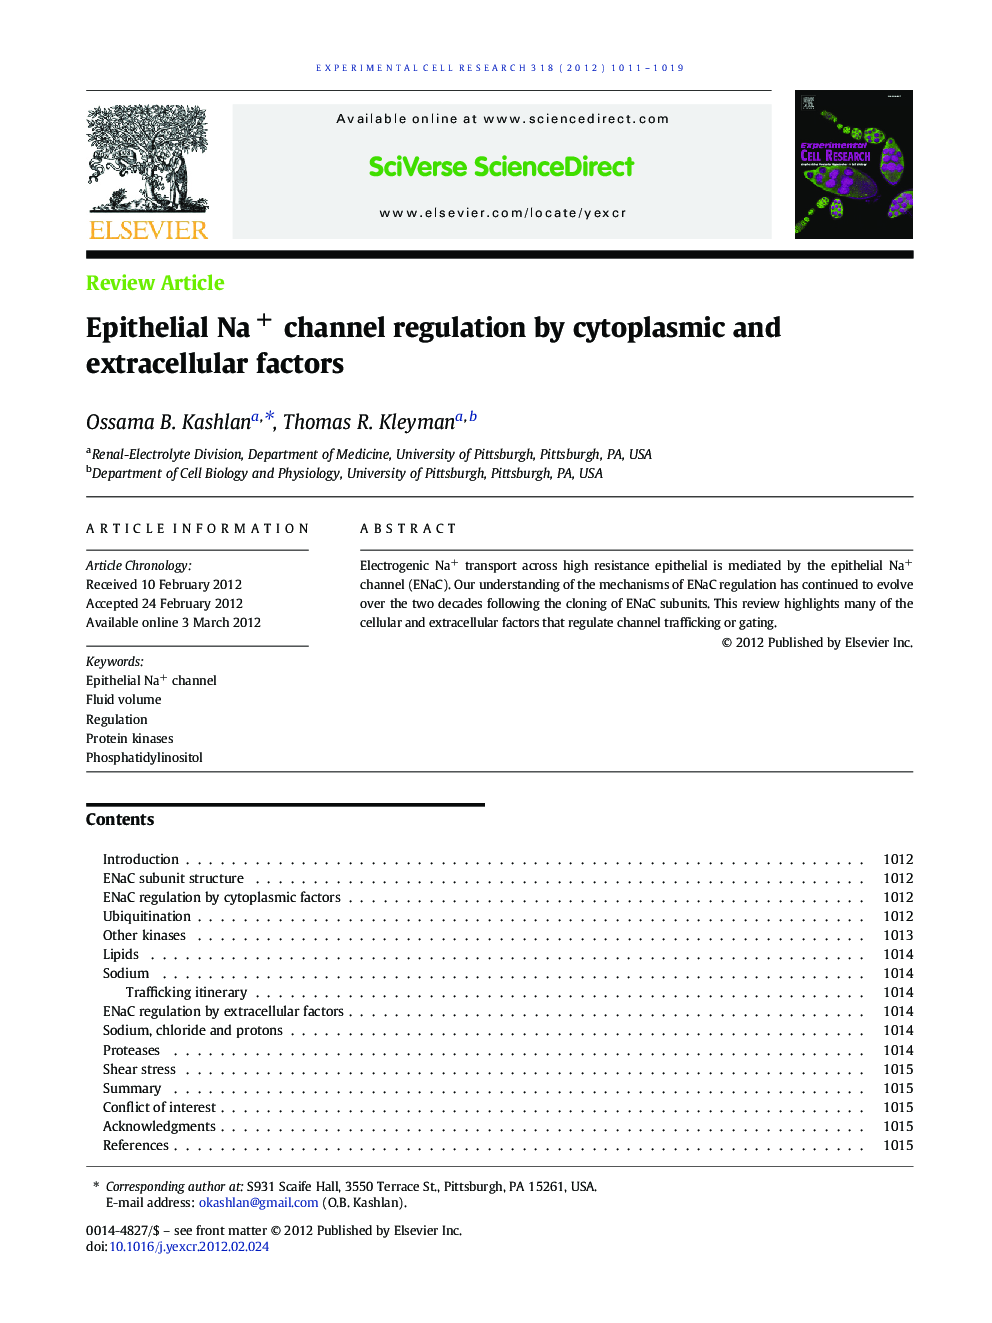 Epithelial Na+ channel regulation by cytoplasmic and extracellular factors